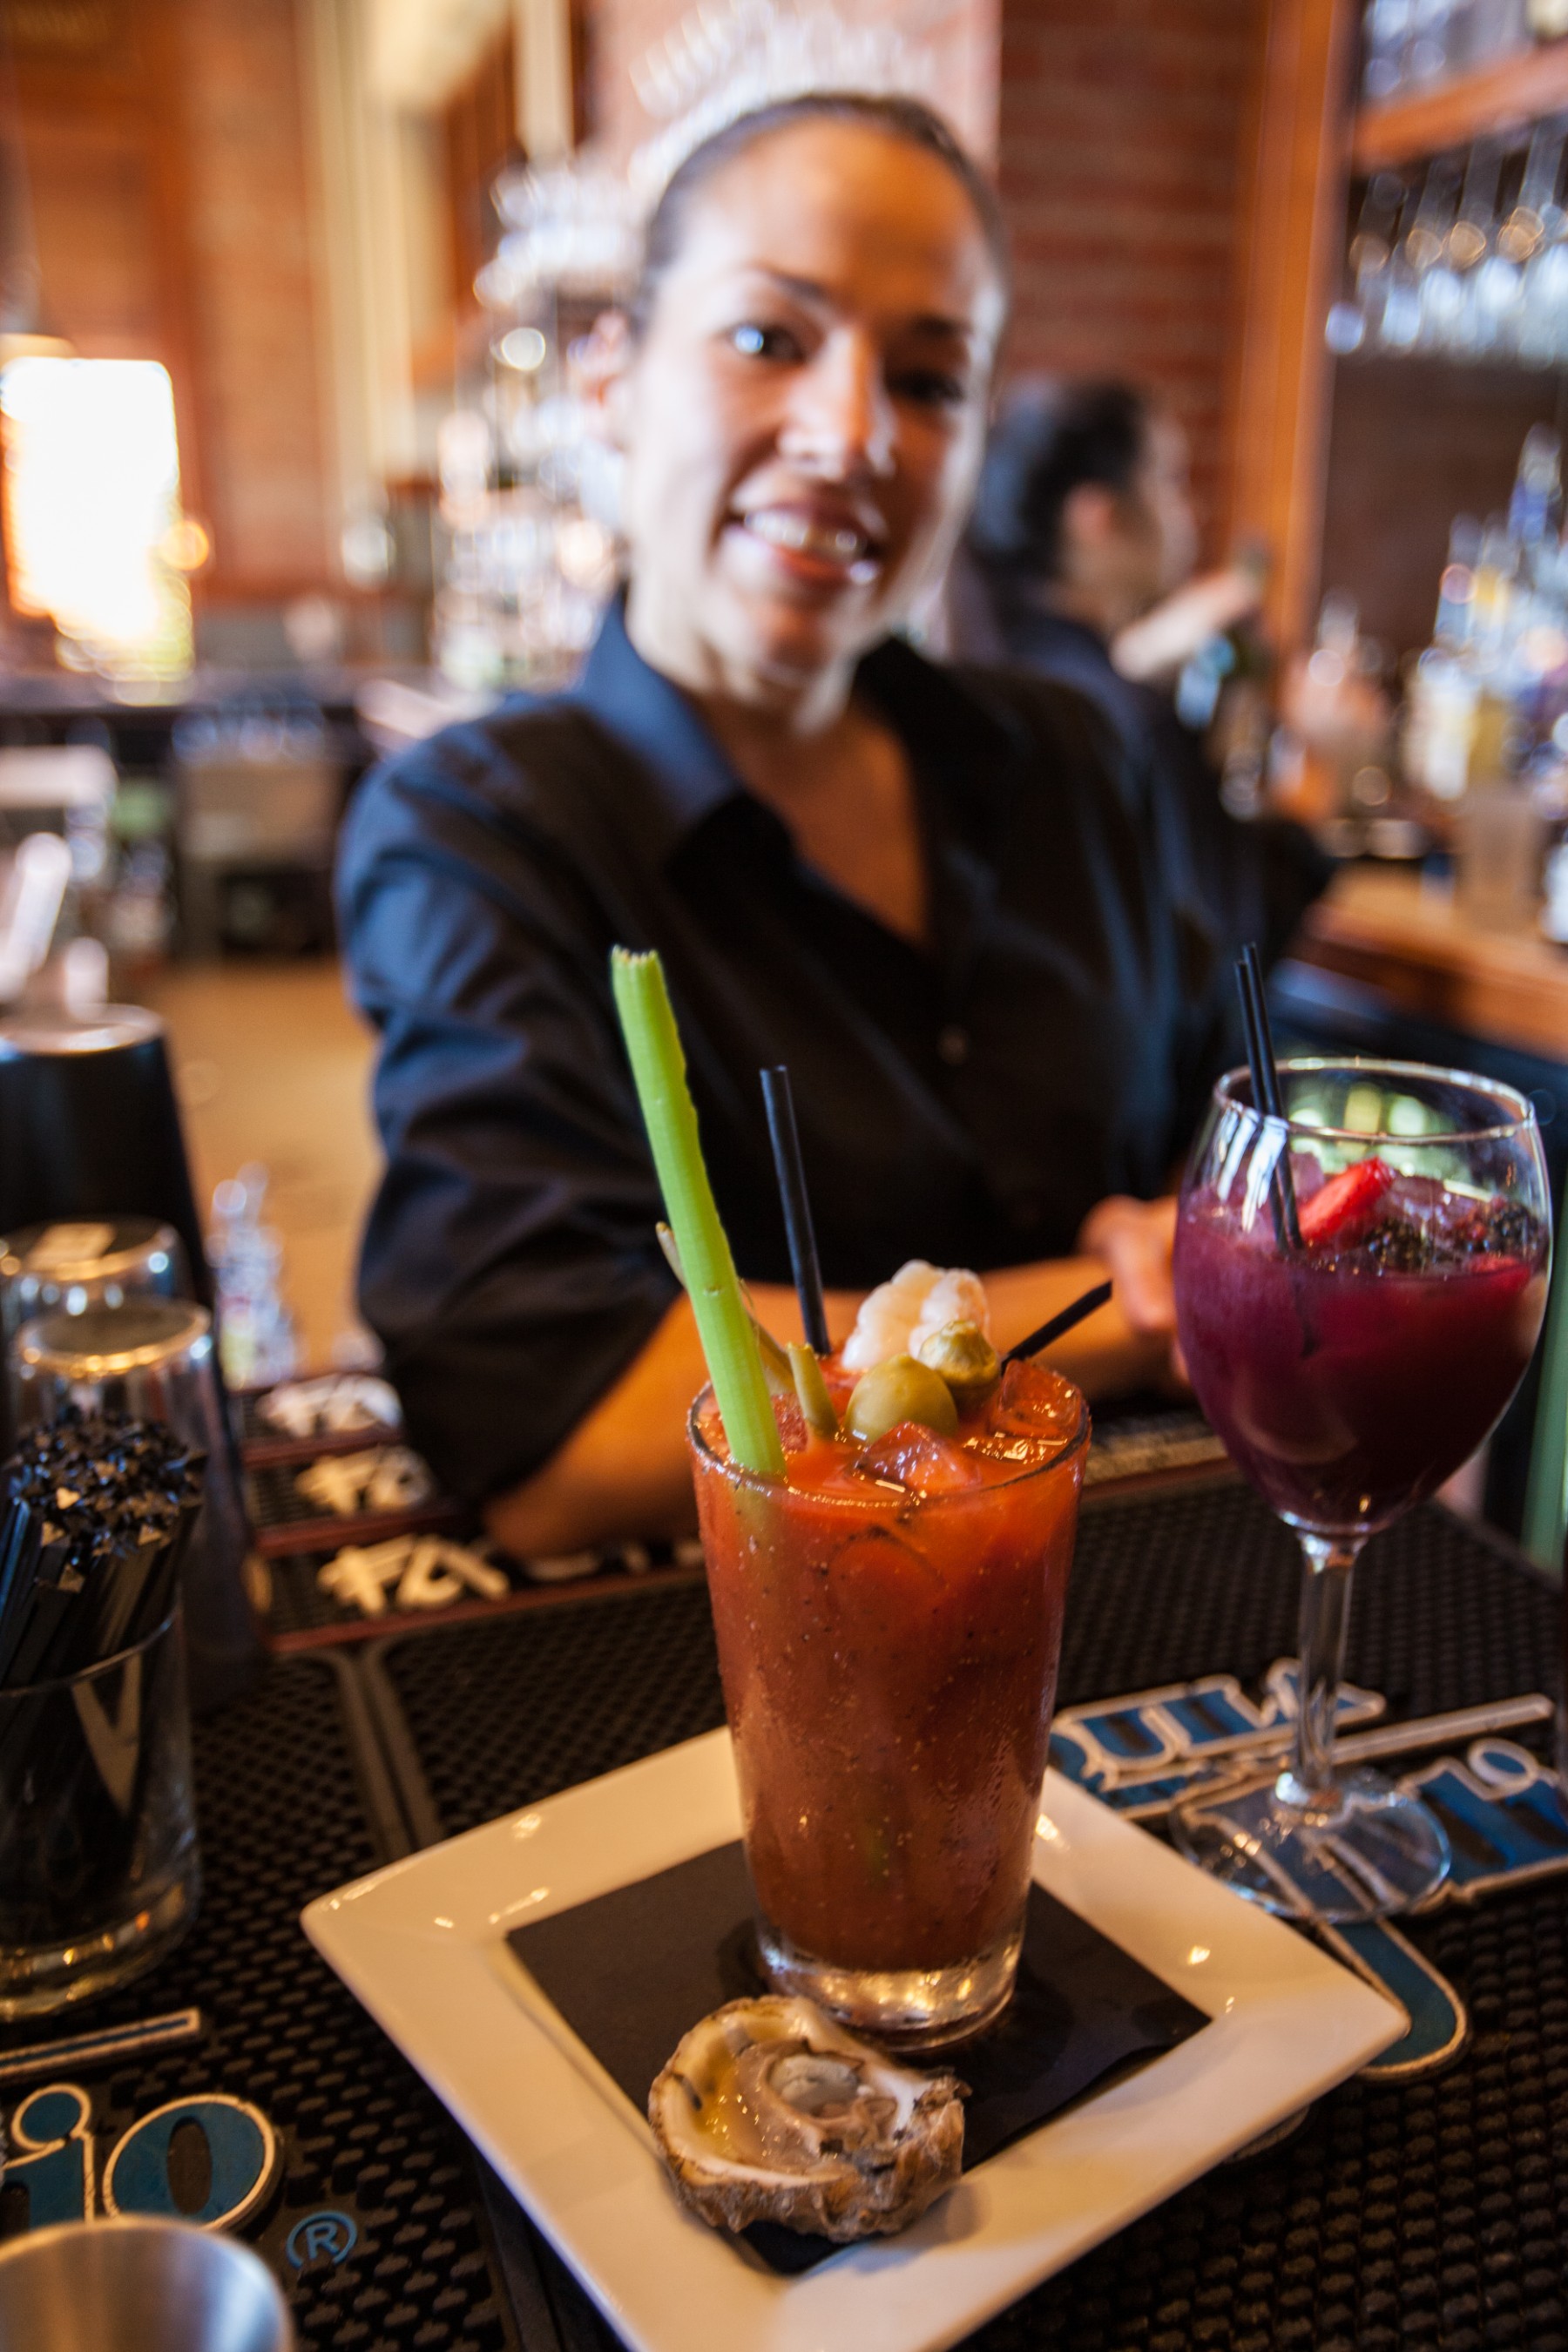 The Bloody Mary’s at McAdoo’s Sunday brunch are served with an oyster, and chock-full of all the right fixin’s.